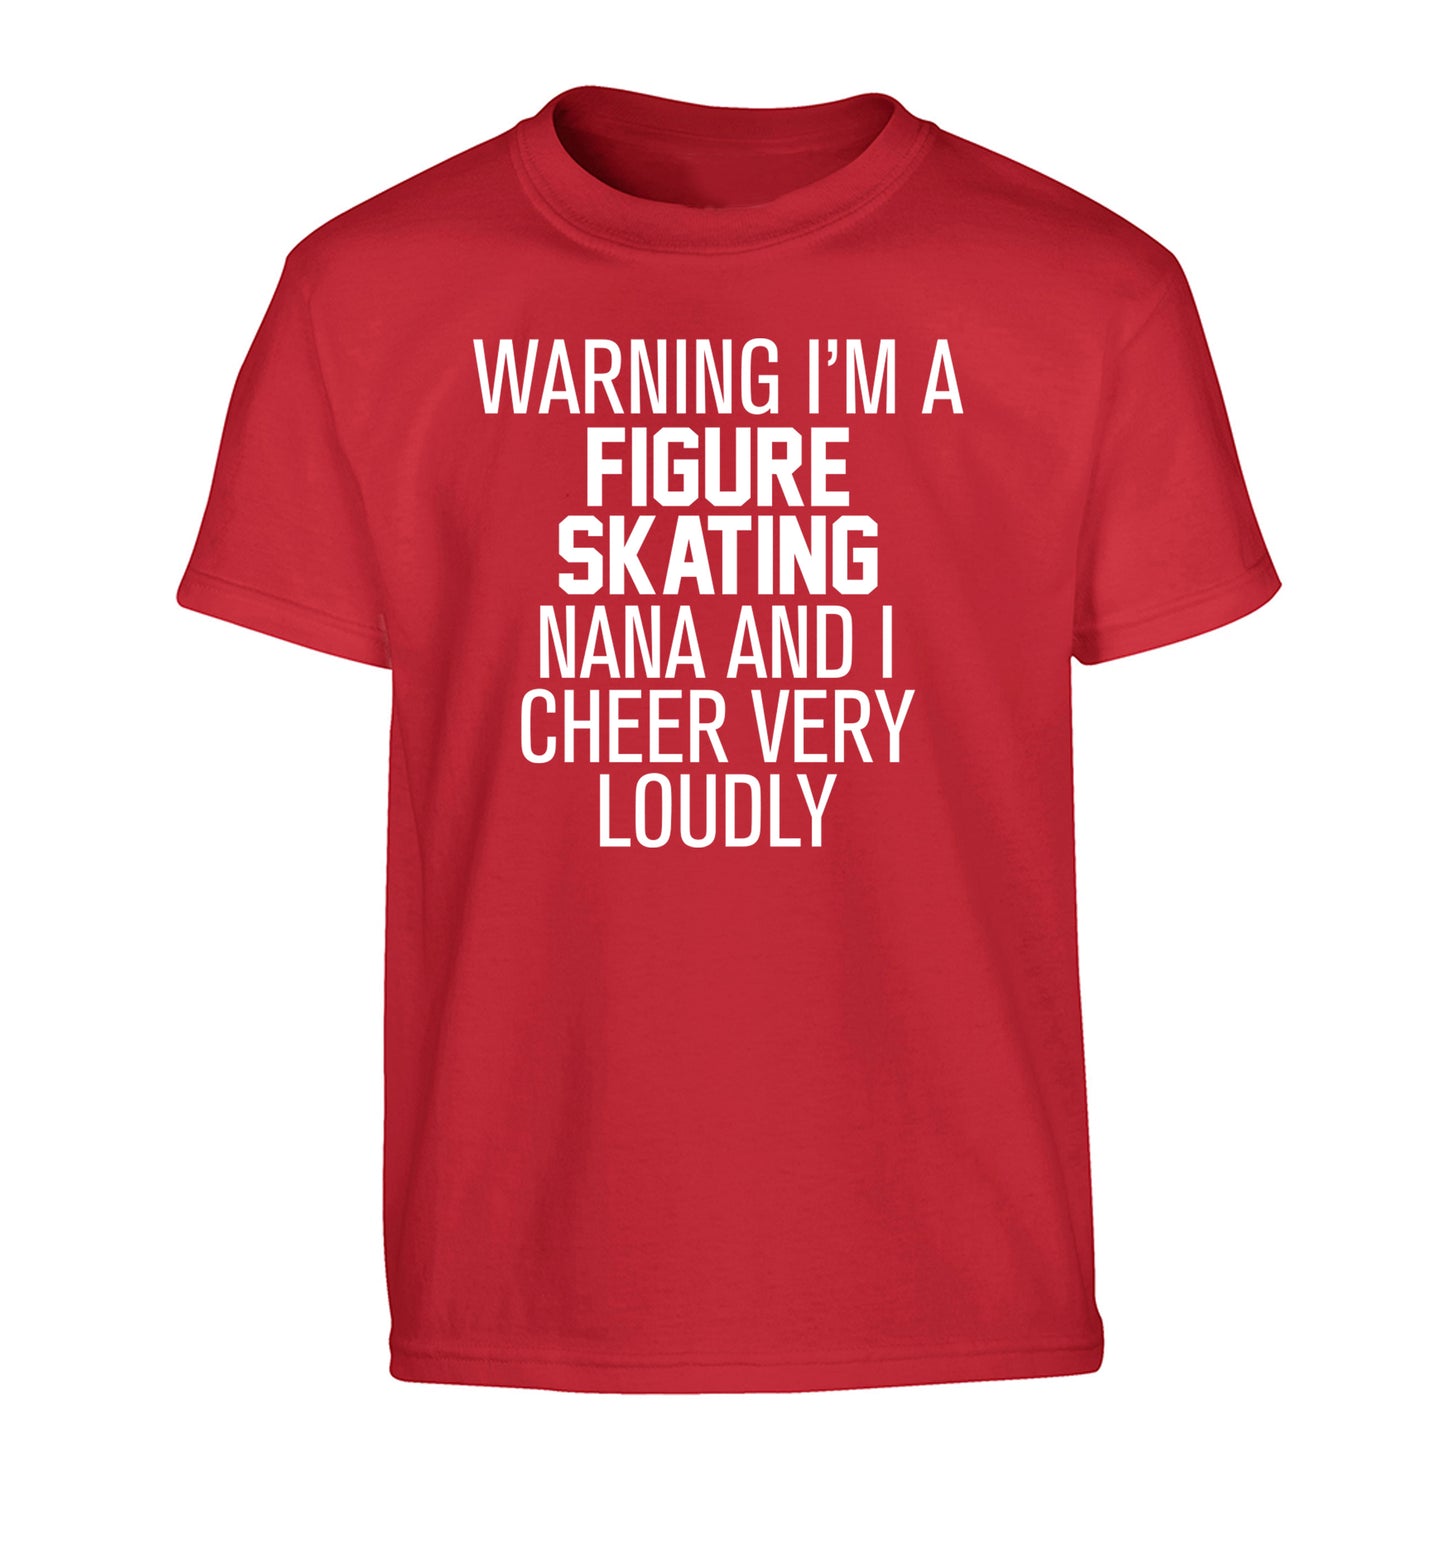 Warning I'm a figure skating nana and I cheer very loudly Children's red Tshirt 12-14 Years